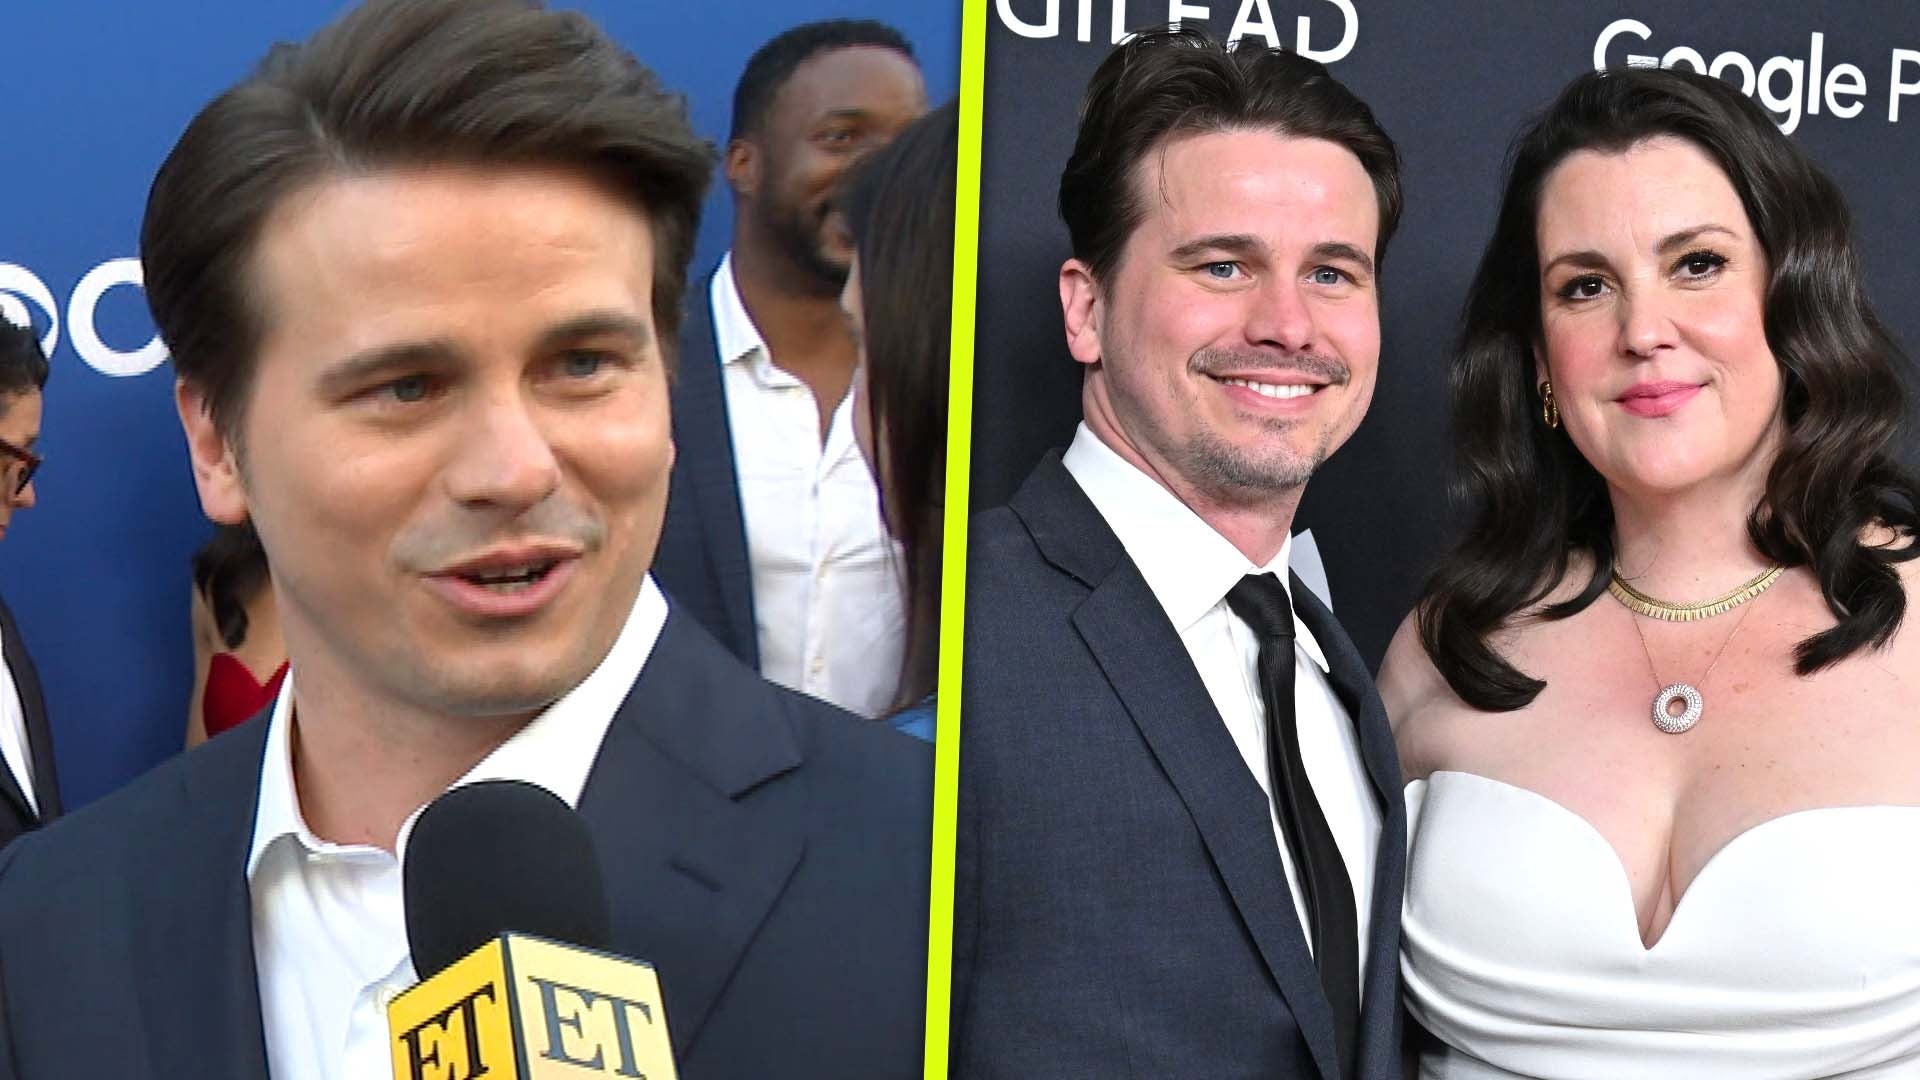 Jason Ritter Shares How His Proposals to Wife Melanie Lynskey All Got Messed Up (Exclusive) 